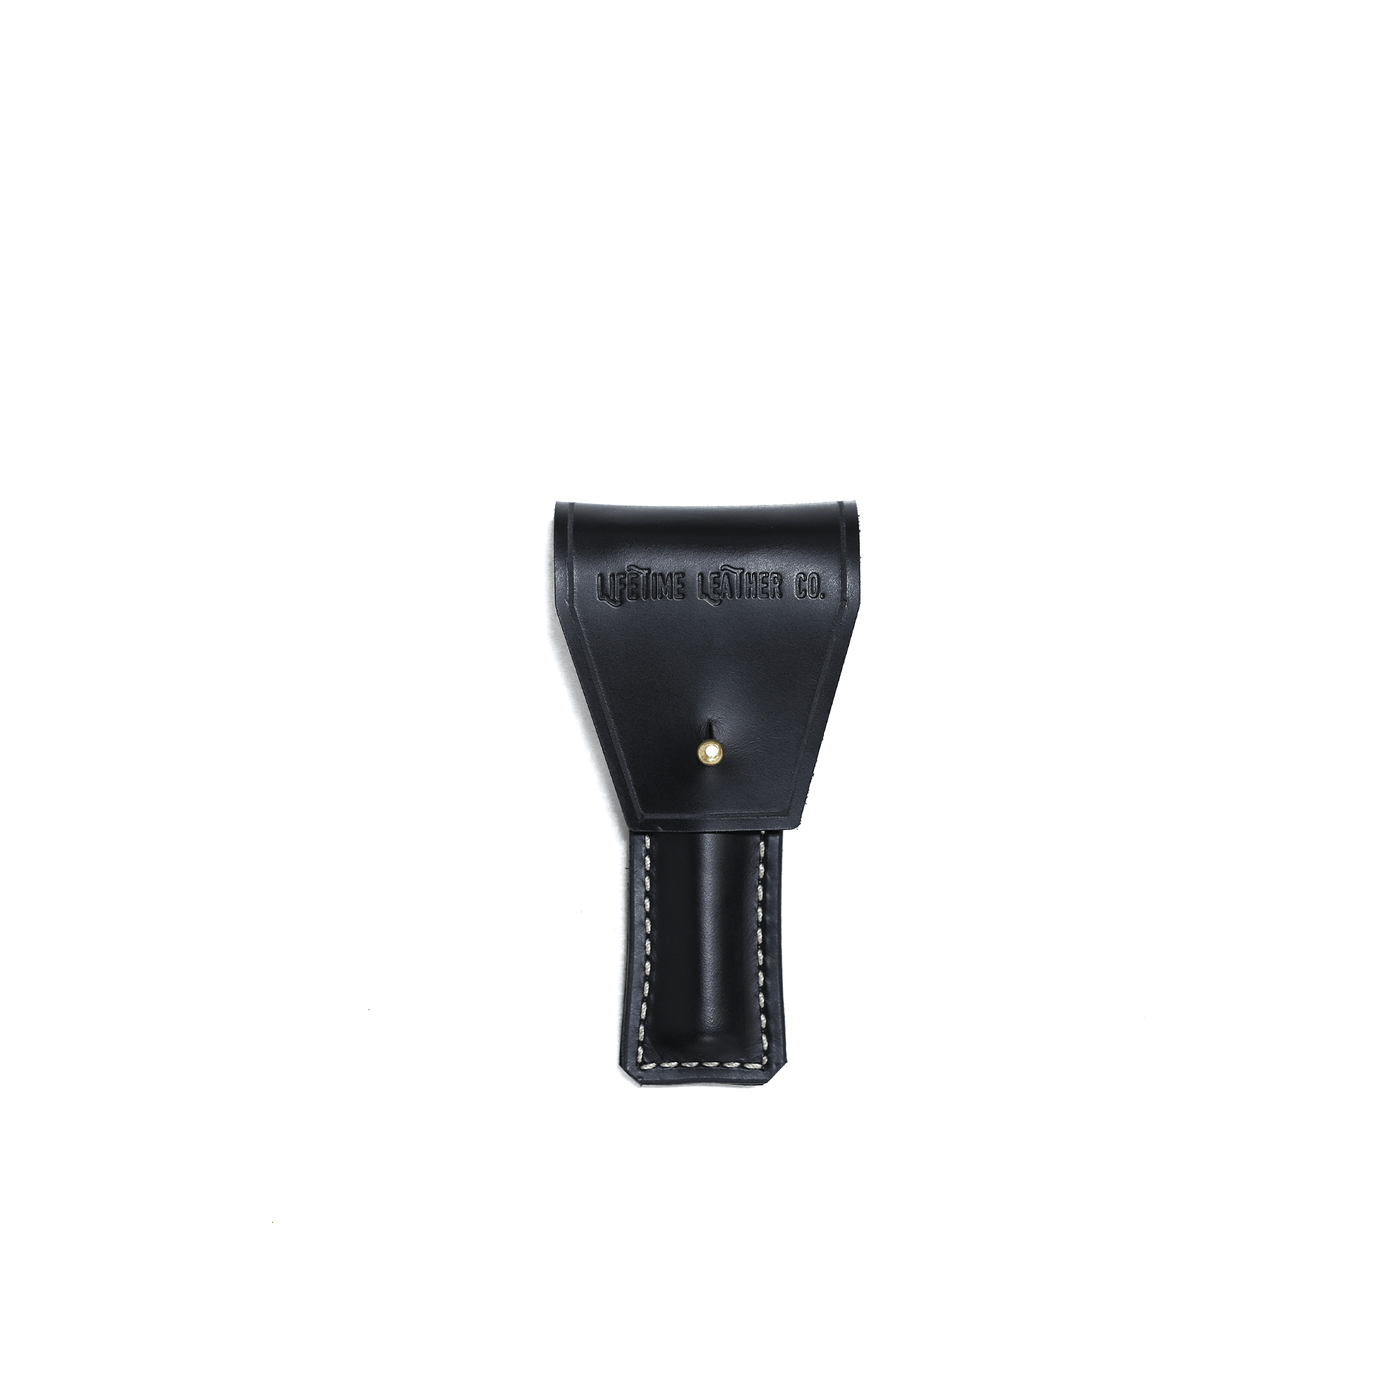 Safety Razor Holder by Lifetime Leather Co